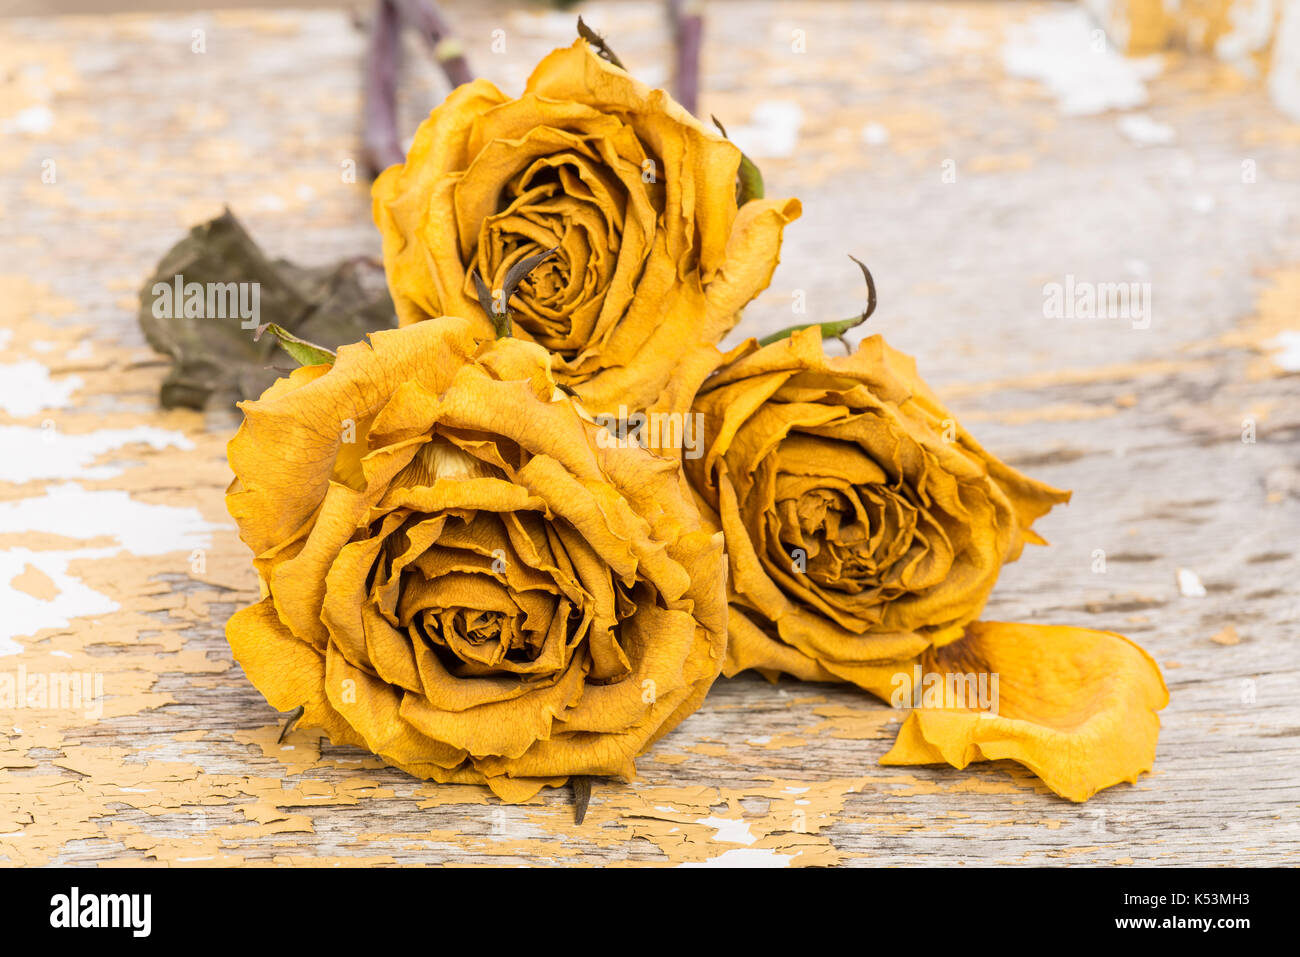 Dried flower petals stock image. Image of scented, roses - 35834181